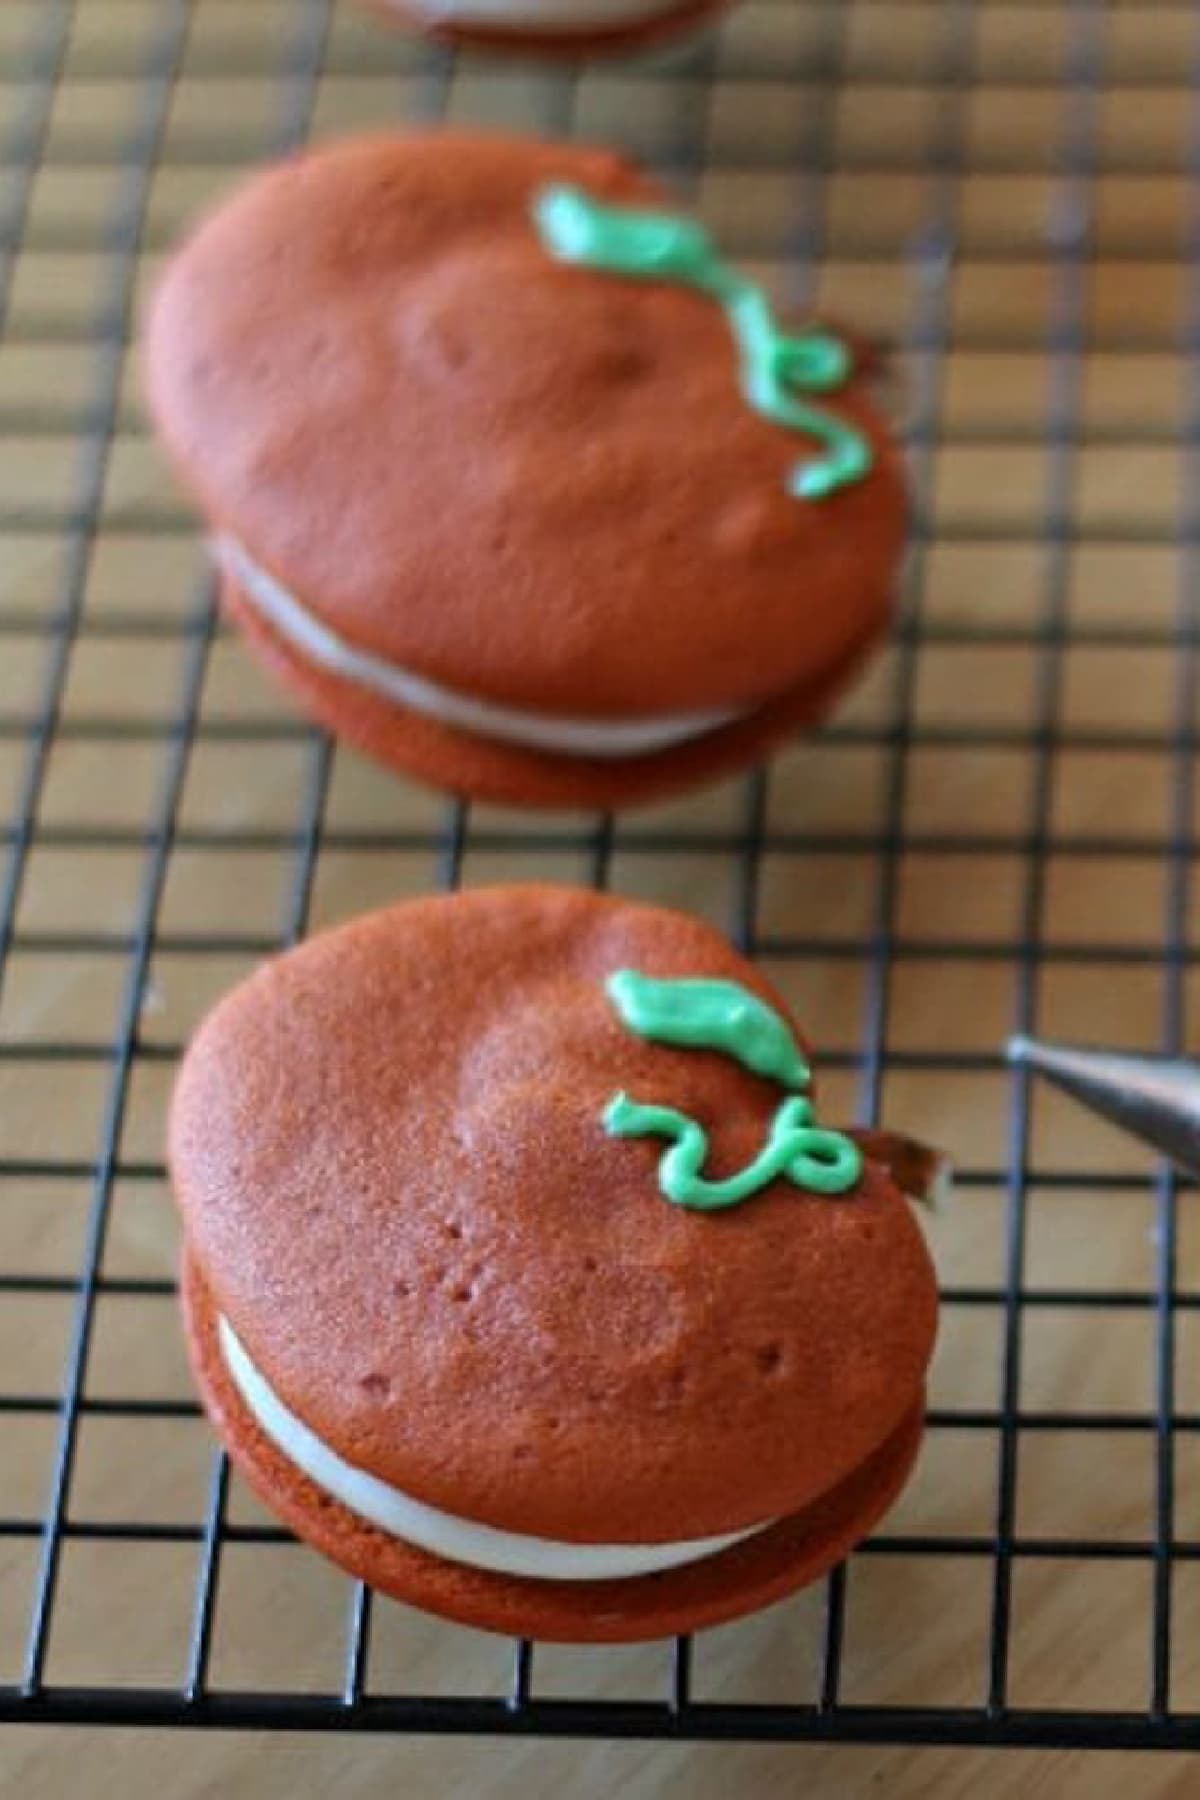 Green icing piped onto an orange sandwich cookie to look like a pumpkin vine.